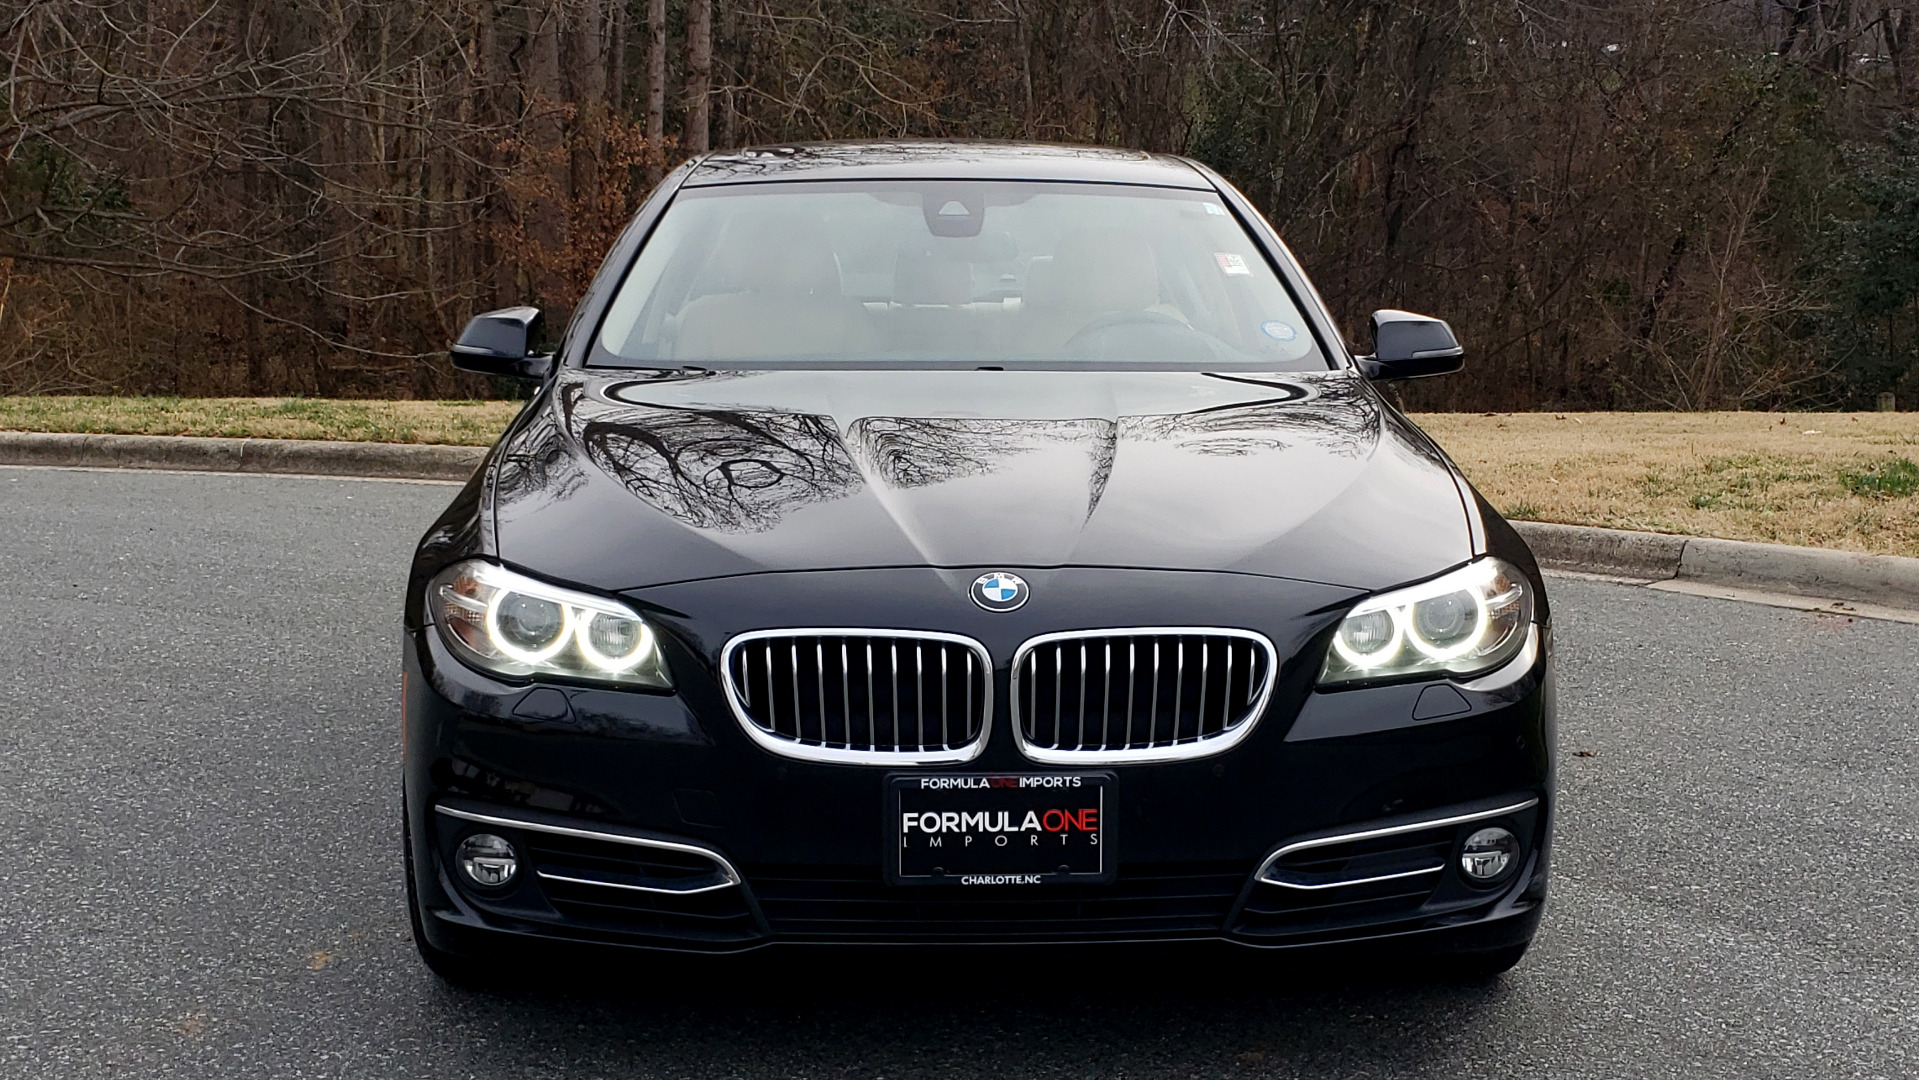 Used 2016 BMW 5 SERIES 528i XDRIVE / PREM PKG / DRVR ASST PLUS / LUXURY / COLD WTHR for sale Sold at Formula Imports in Charlotte NC 28227 23